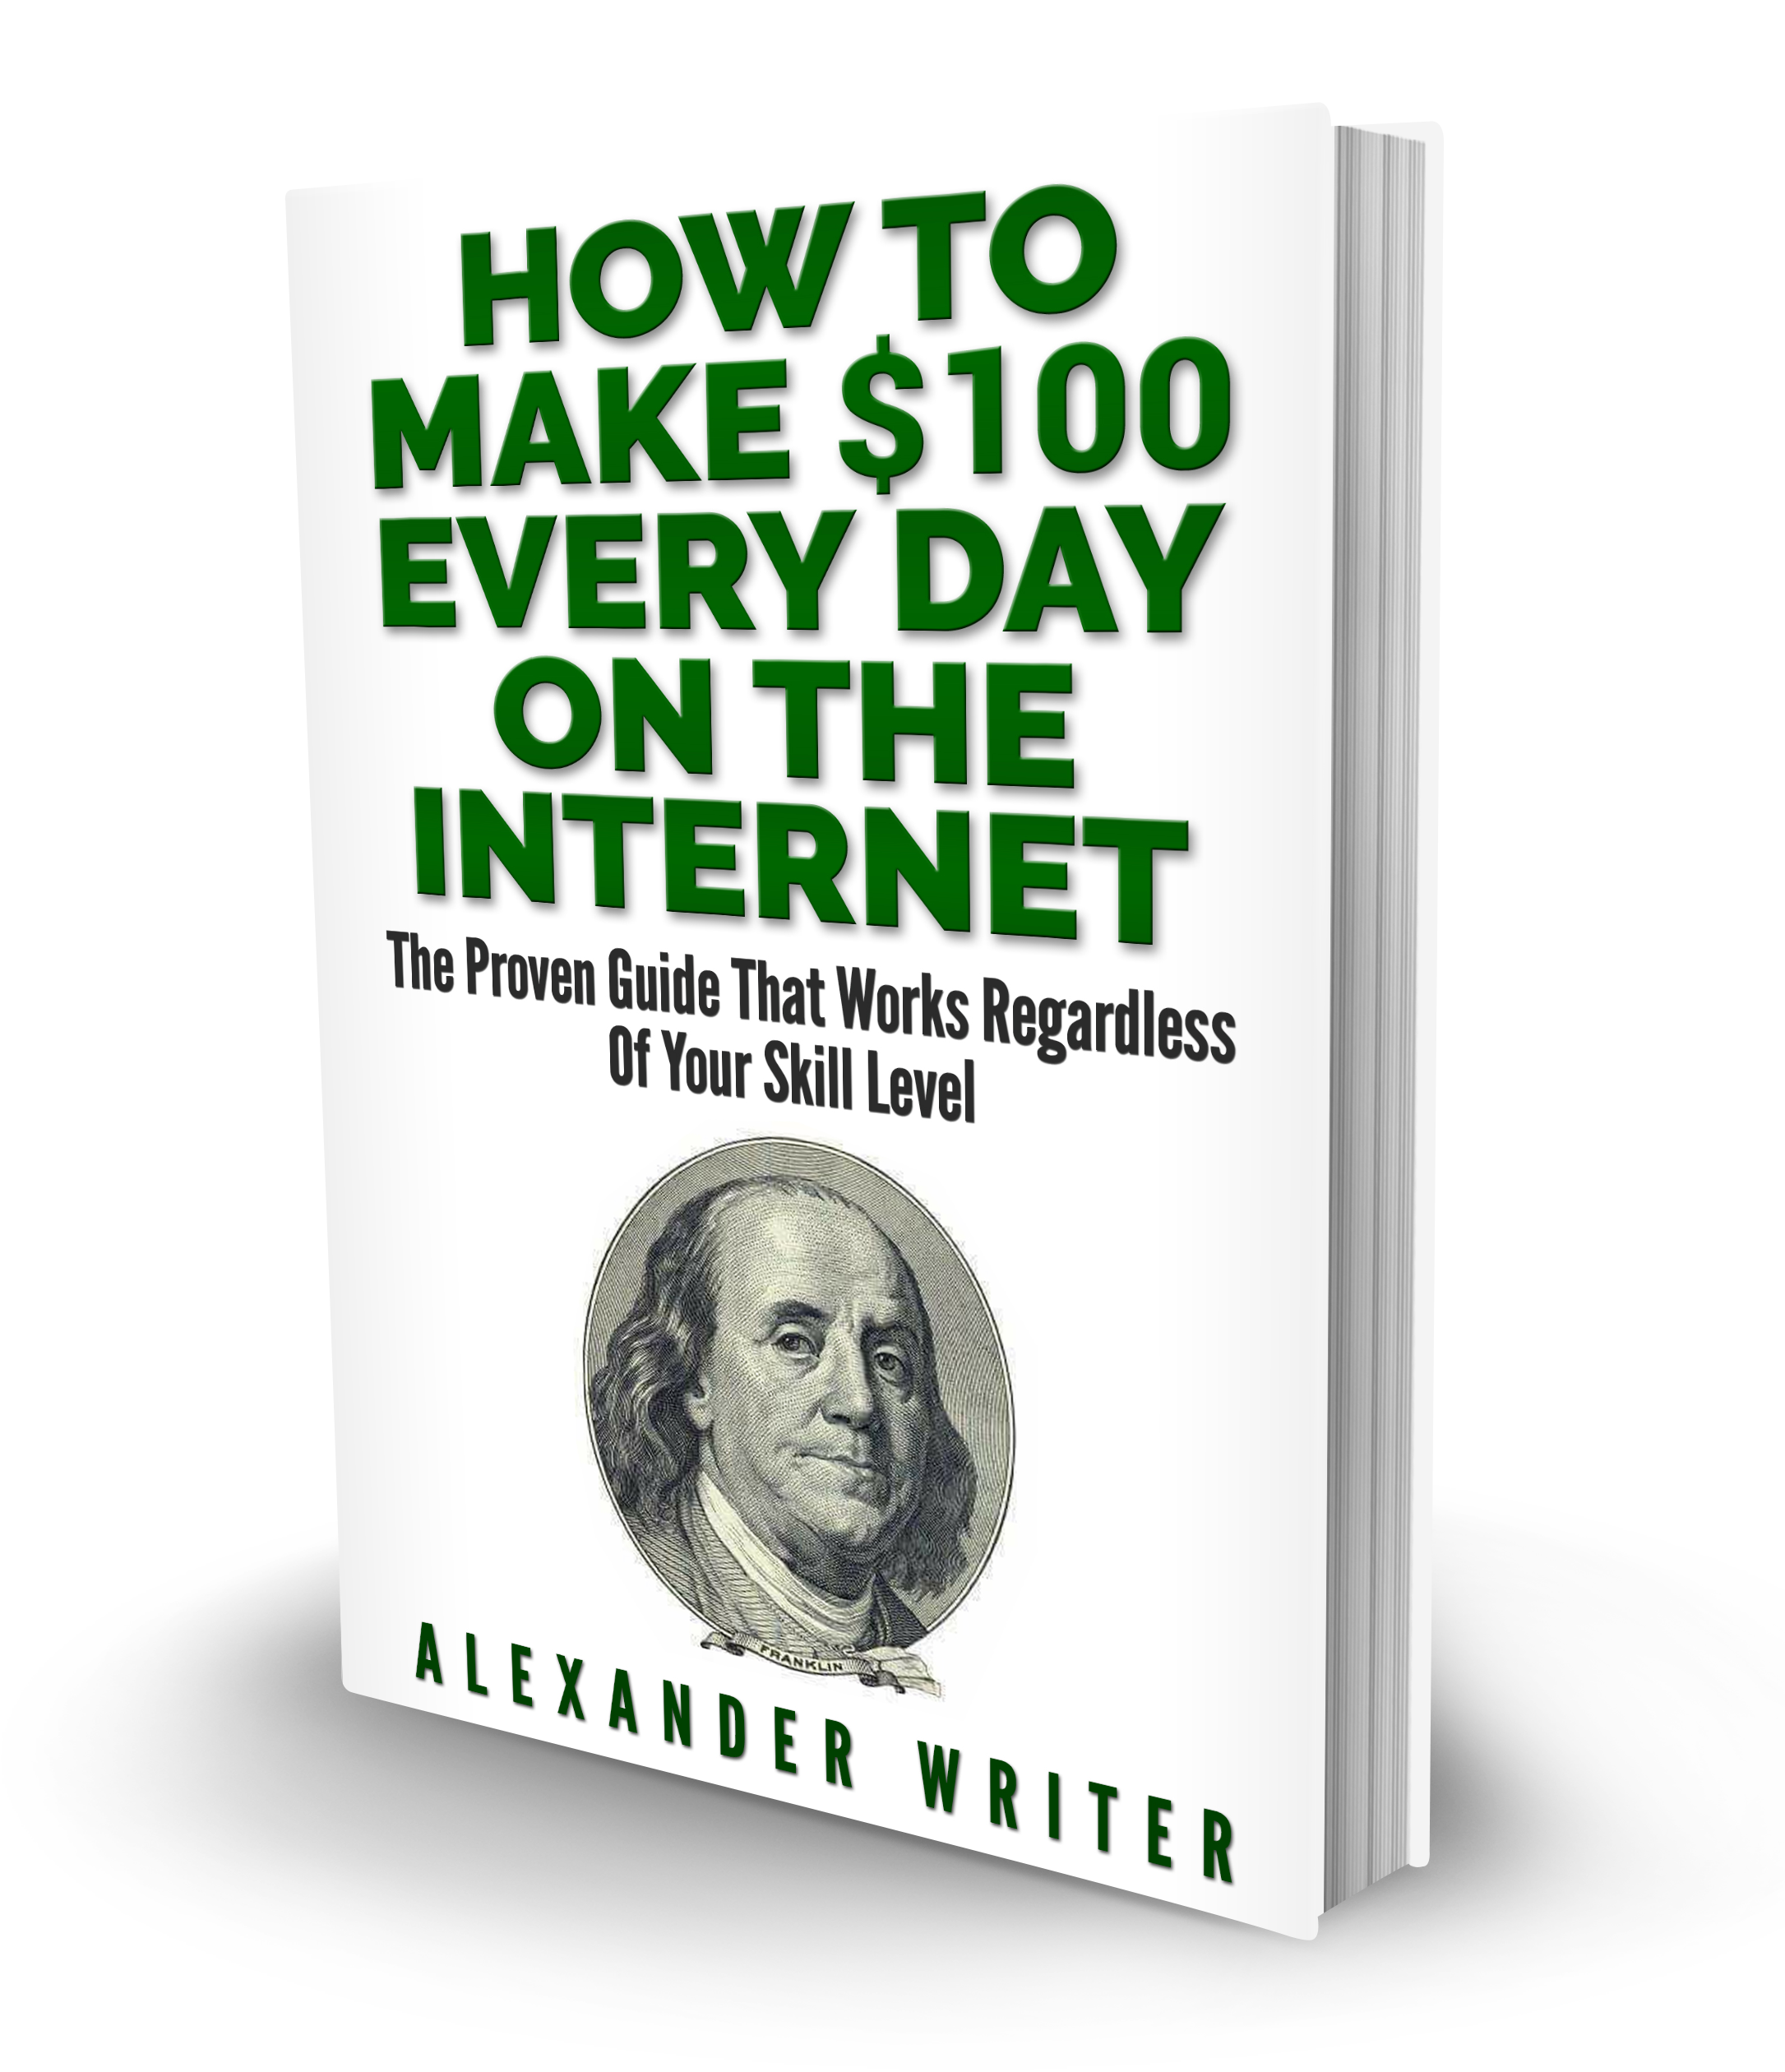 how to make $100 every day on the internet